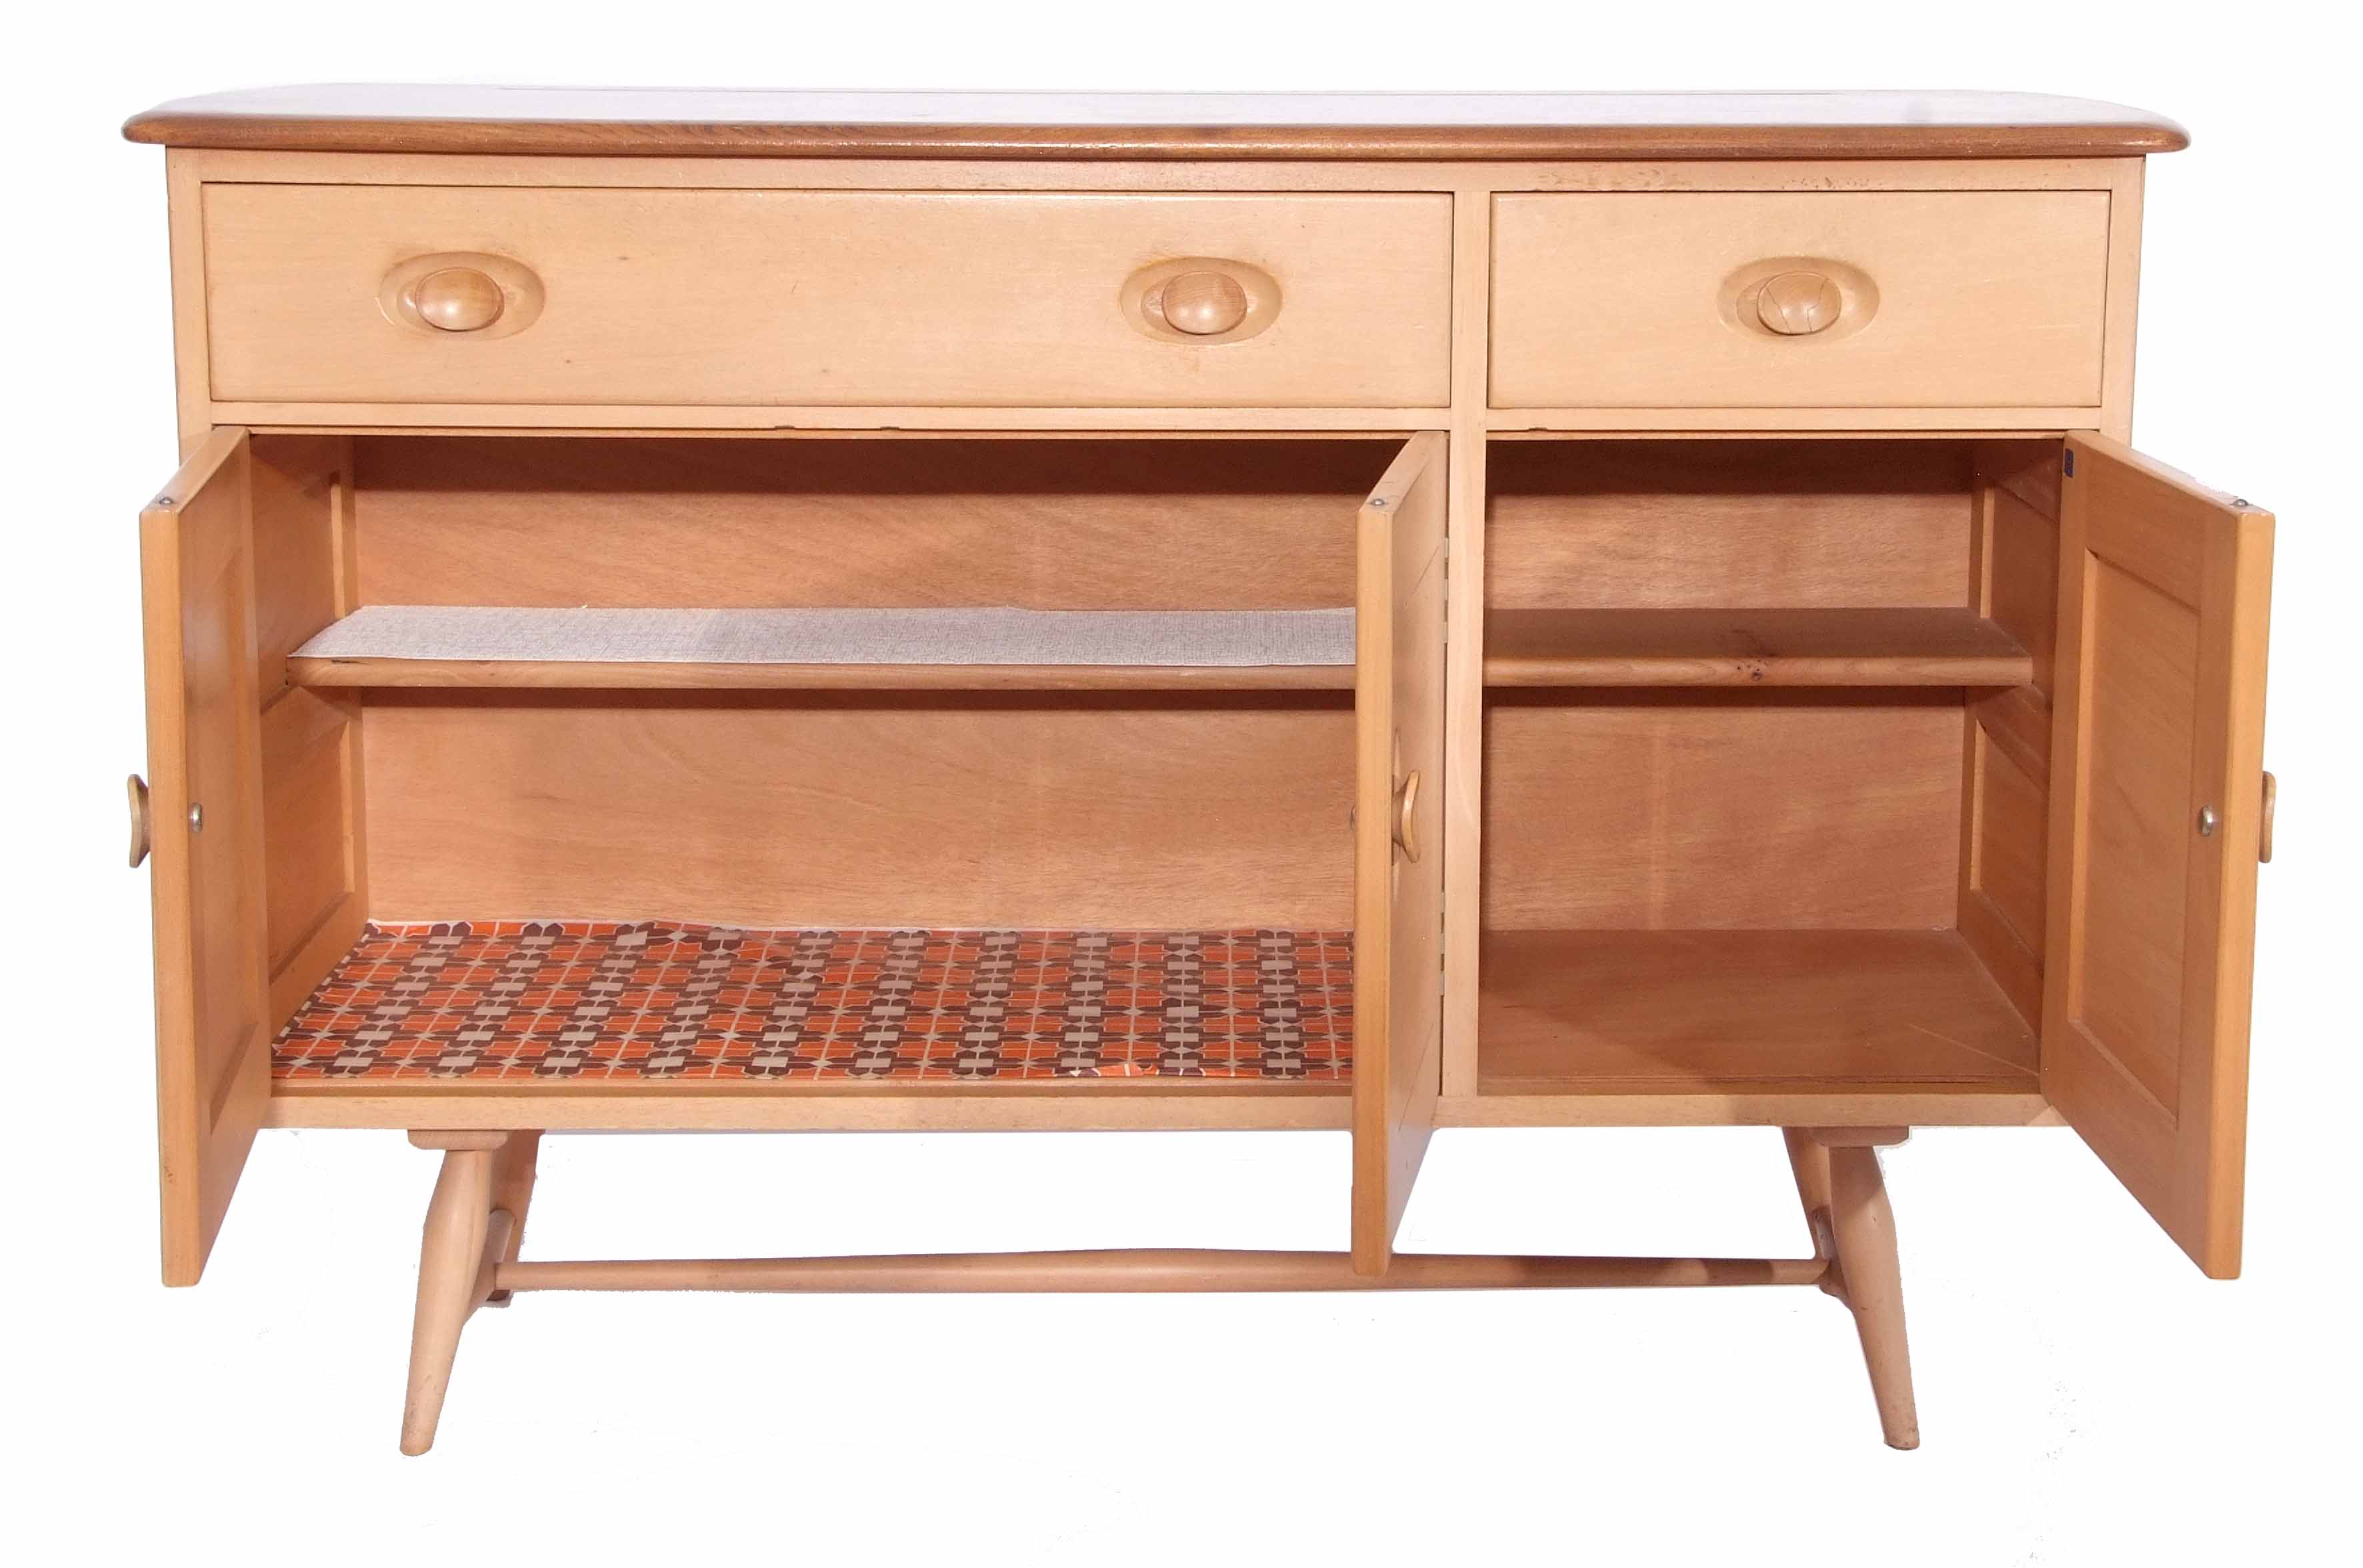 Circa 1960s Ercol sideboard comprising two drawers over three cupboards - Image 2 of 2